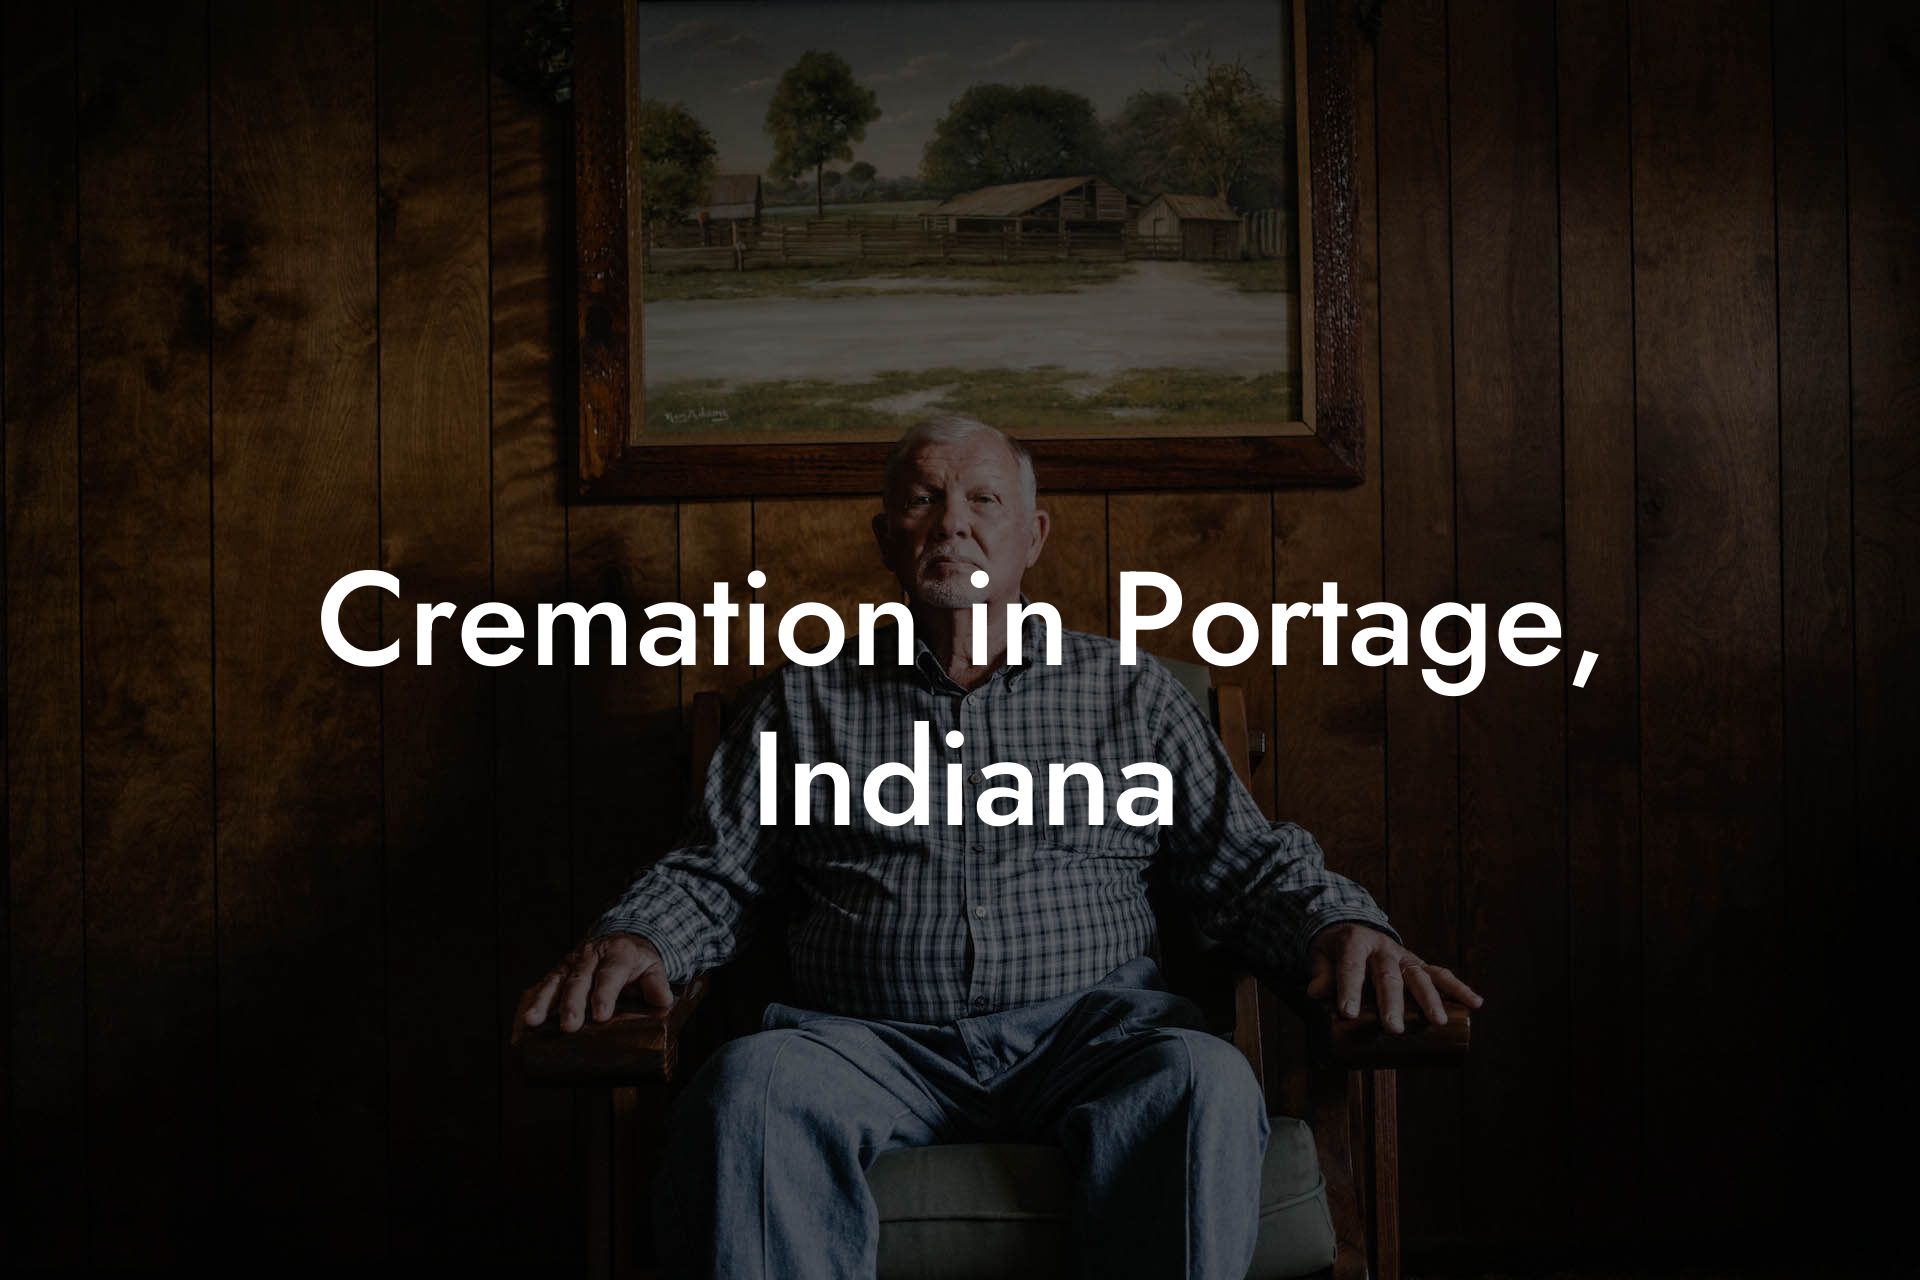 Cremation in Portage, Indiana